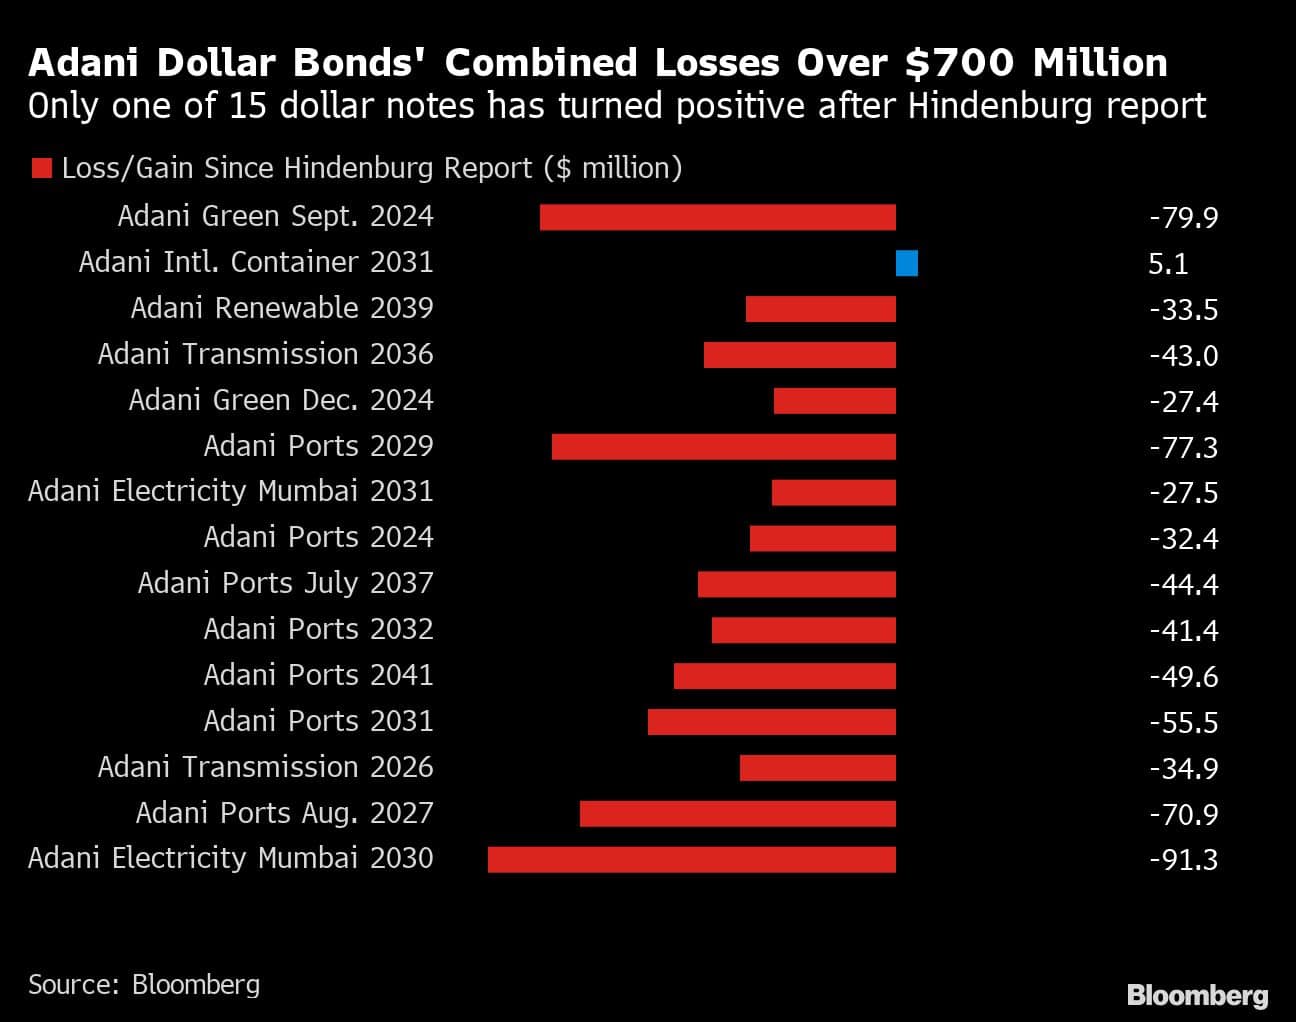 Adani Dollar Bonds' Combined Losses Over $ 700 Million | Only one of 15 dollar notes has turned positive after Hindenburg report